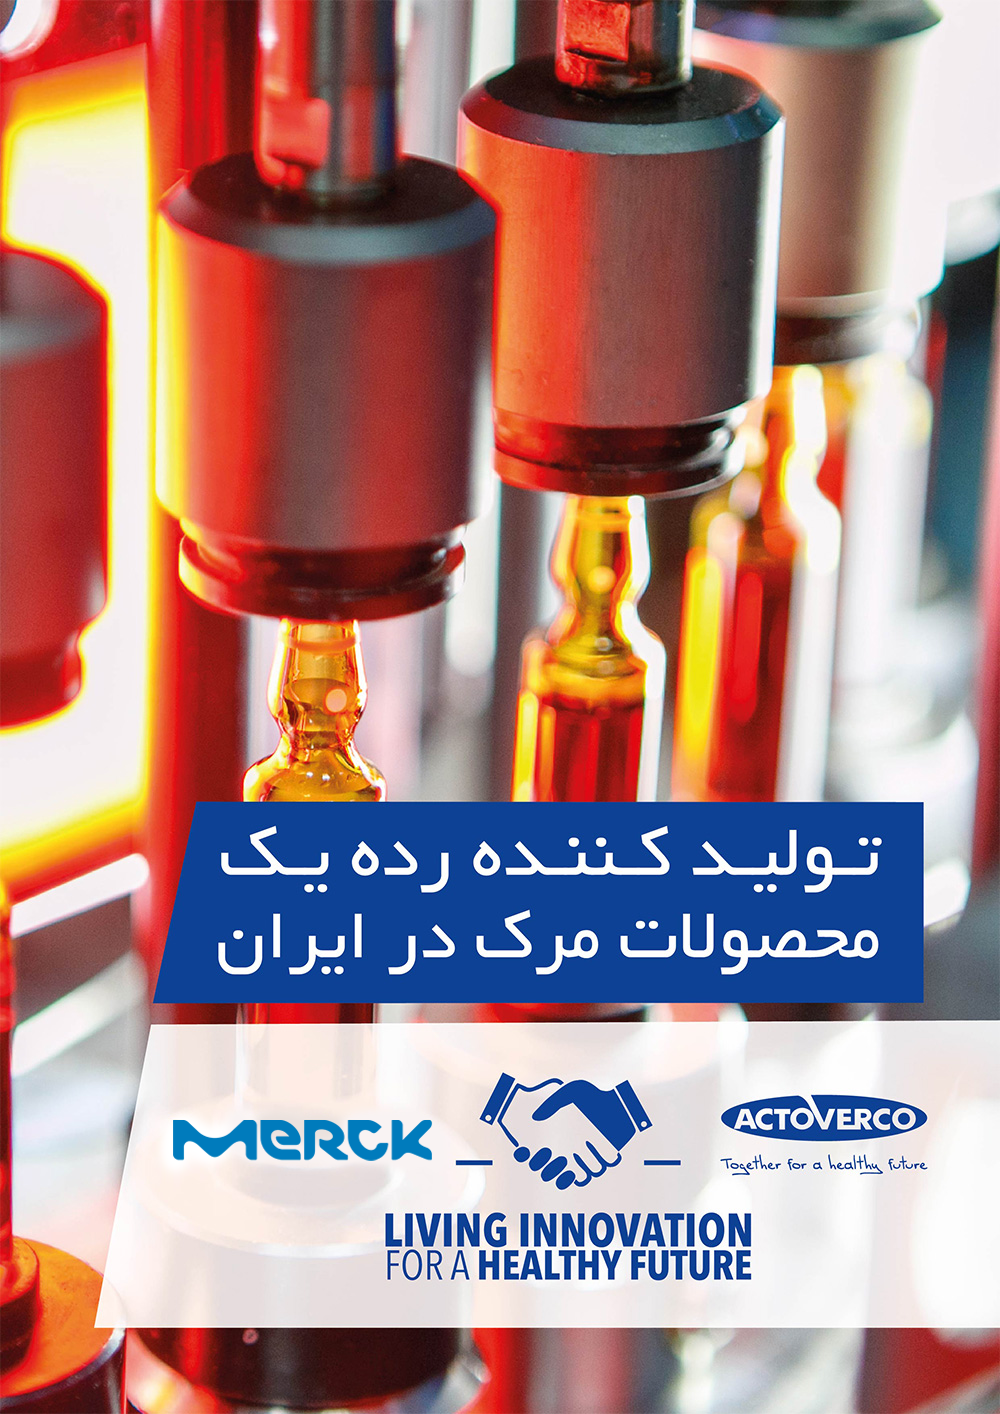 Merck - Living Innovation for a Healthy future